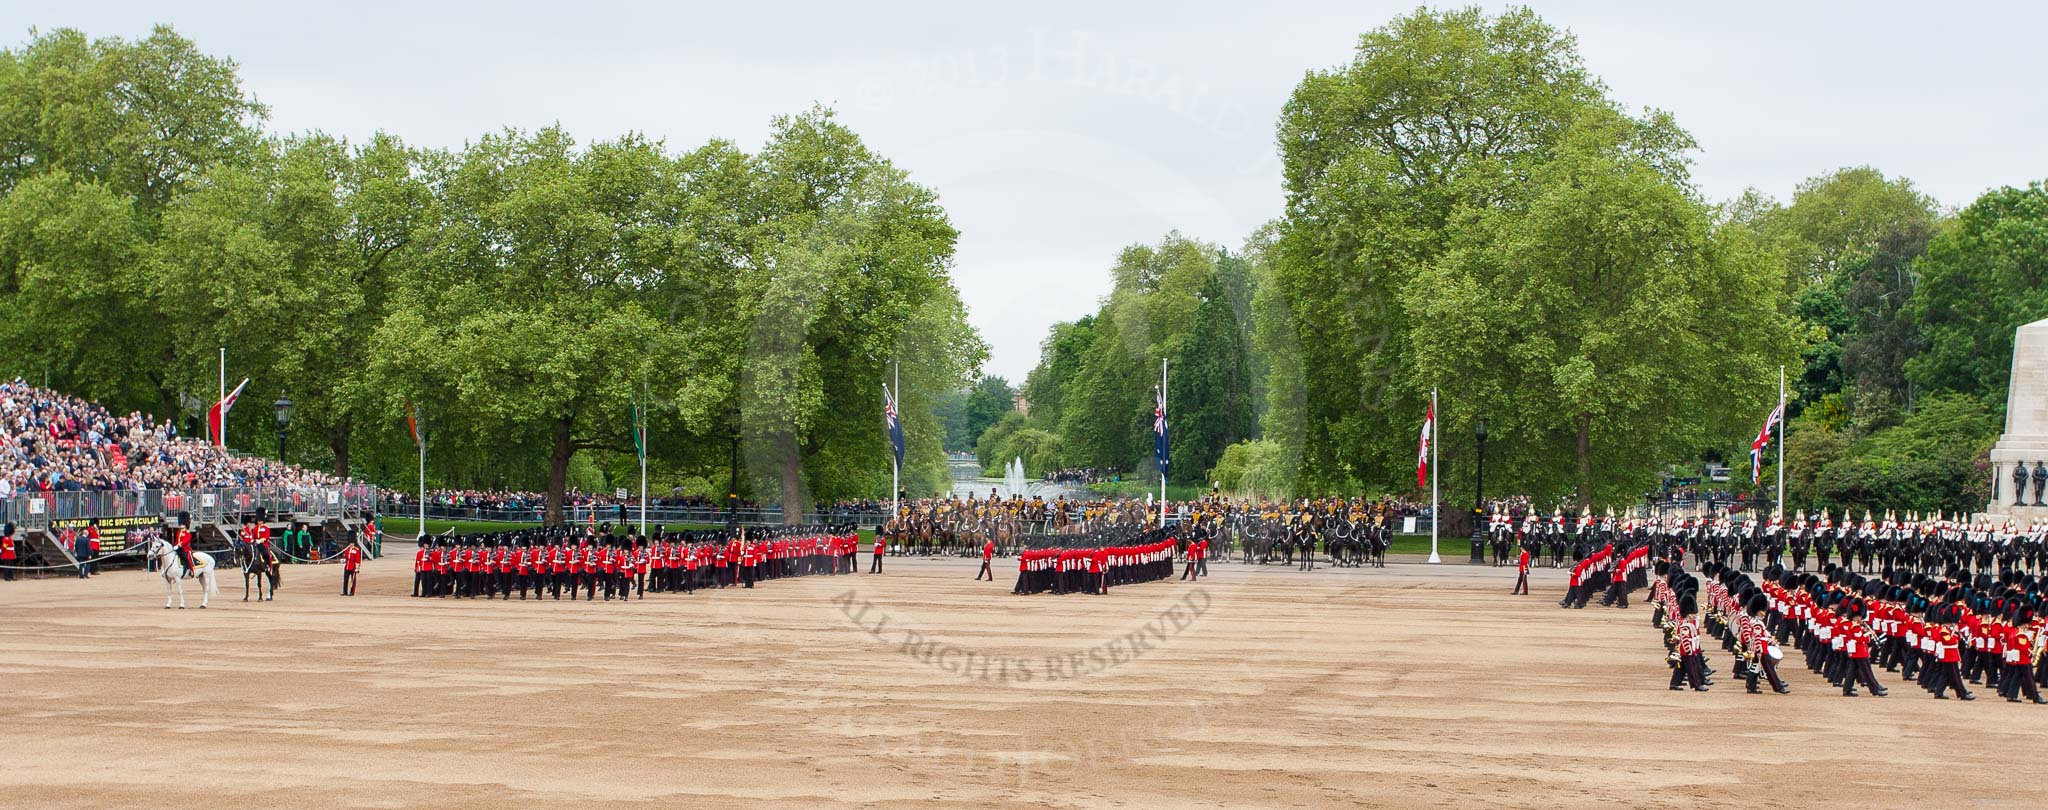 Major General's Review 2013: The March Past in Slow Time - Field Officer and Major of the Parade leading the six guards around Horse Guards Parade..
Horse Guards Parade, Westminster,
London SW1,

United Kingdom,
on 01 June 2013 at 11:30, image #463